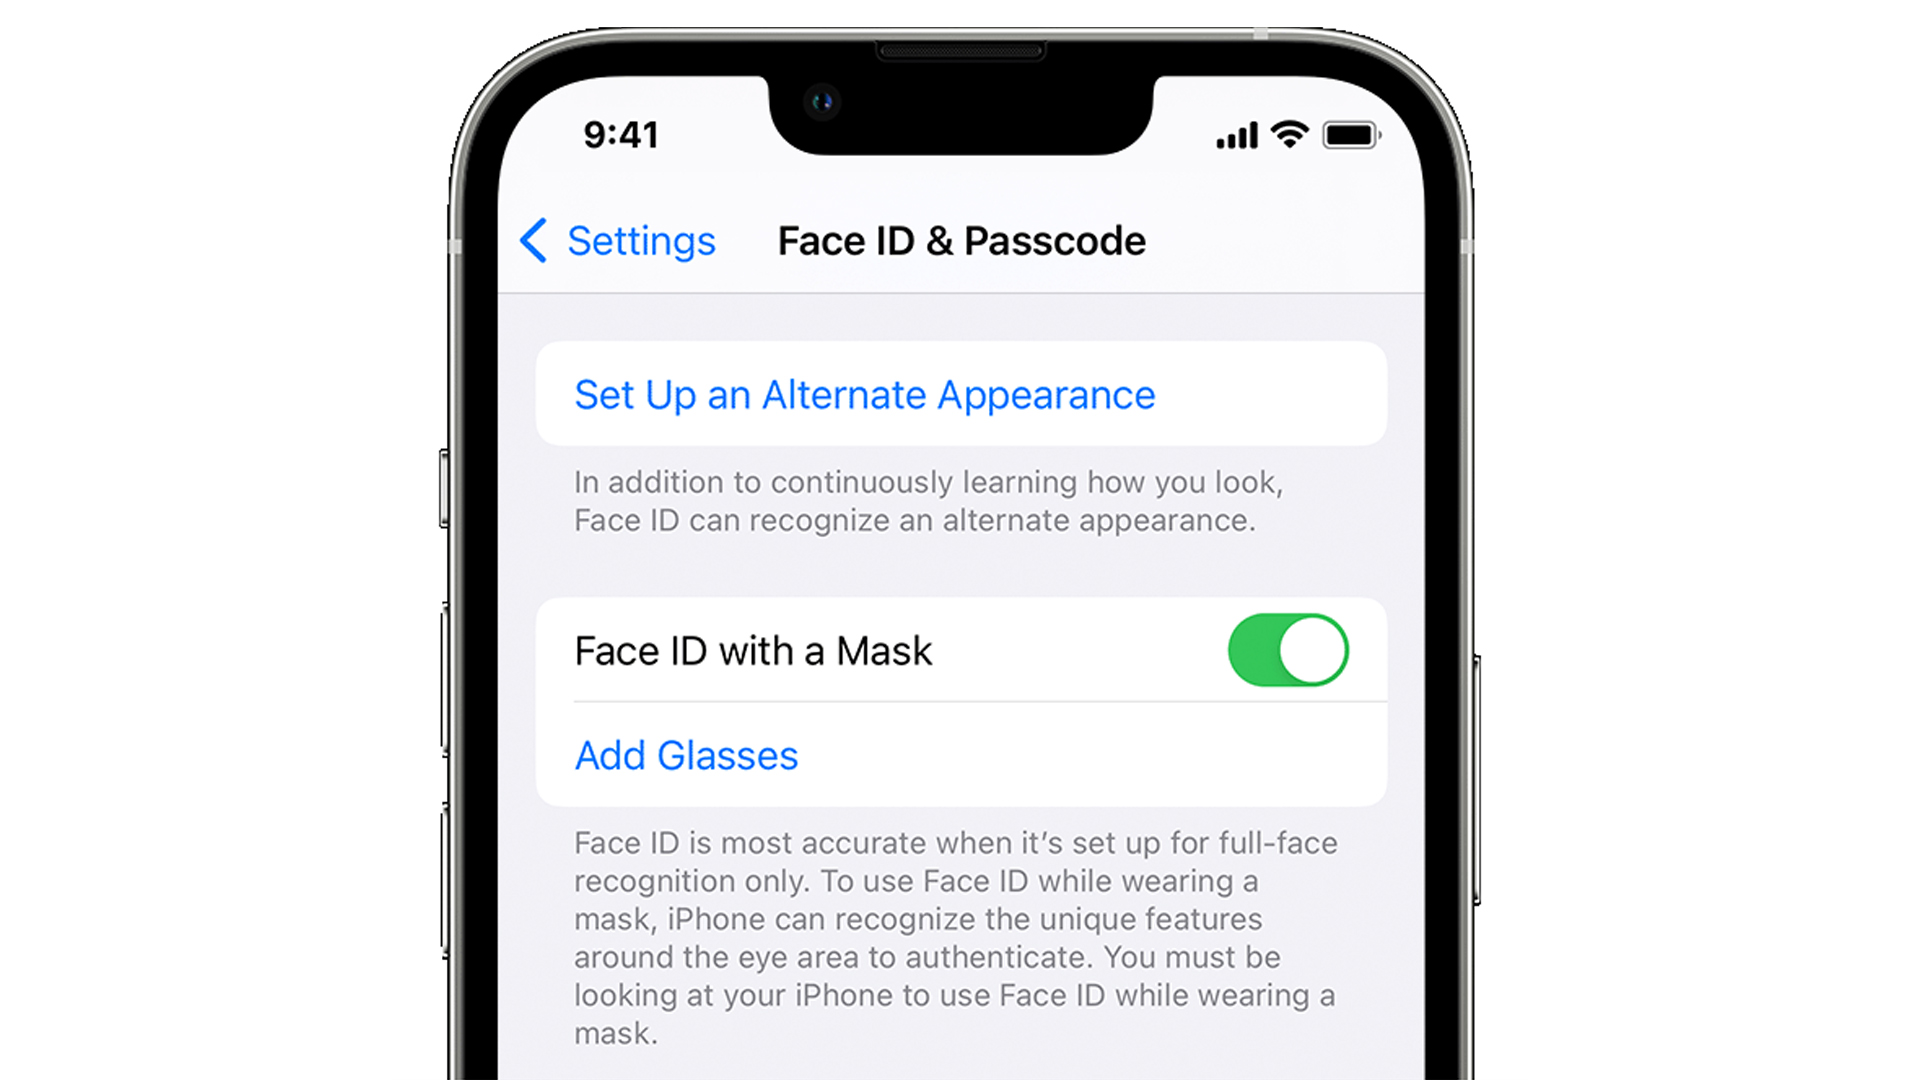 Using Face ID with a mask on iPhone